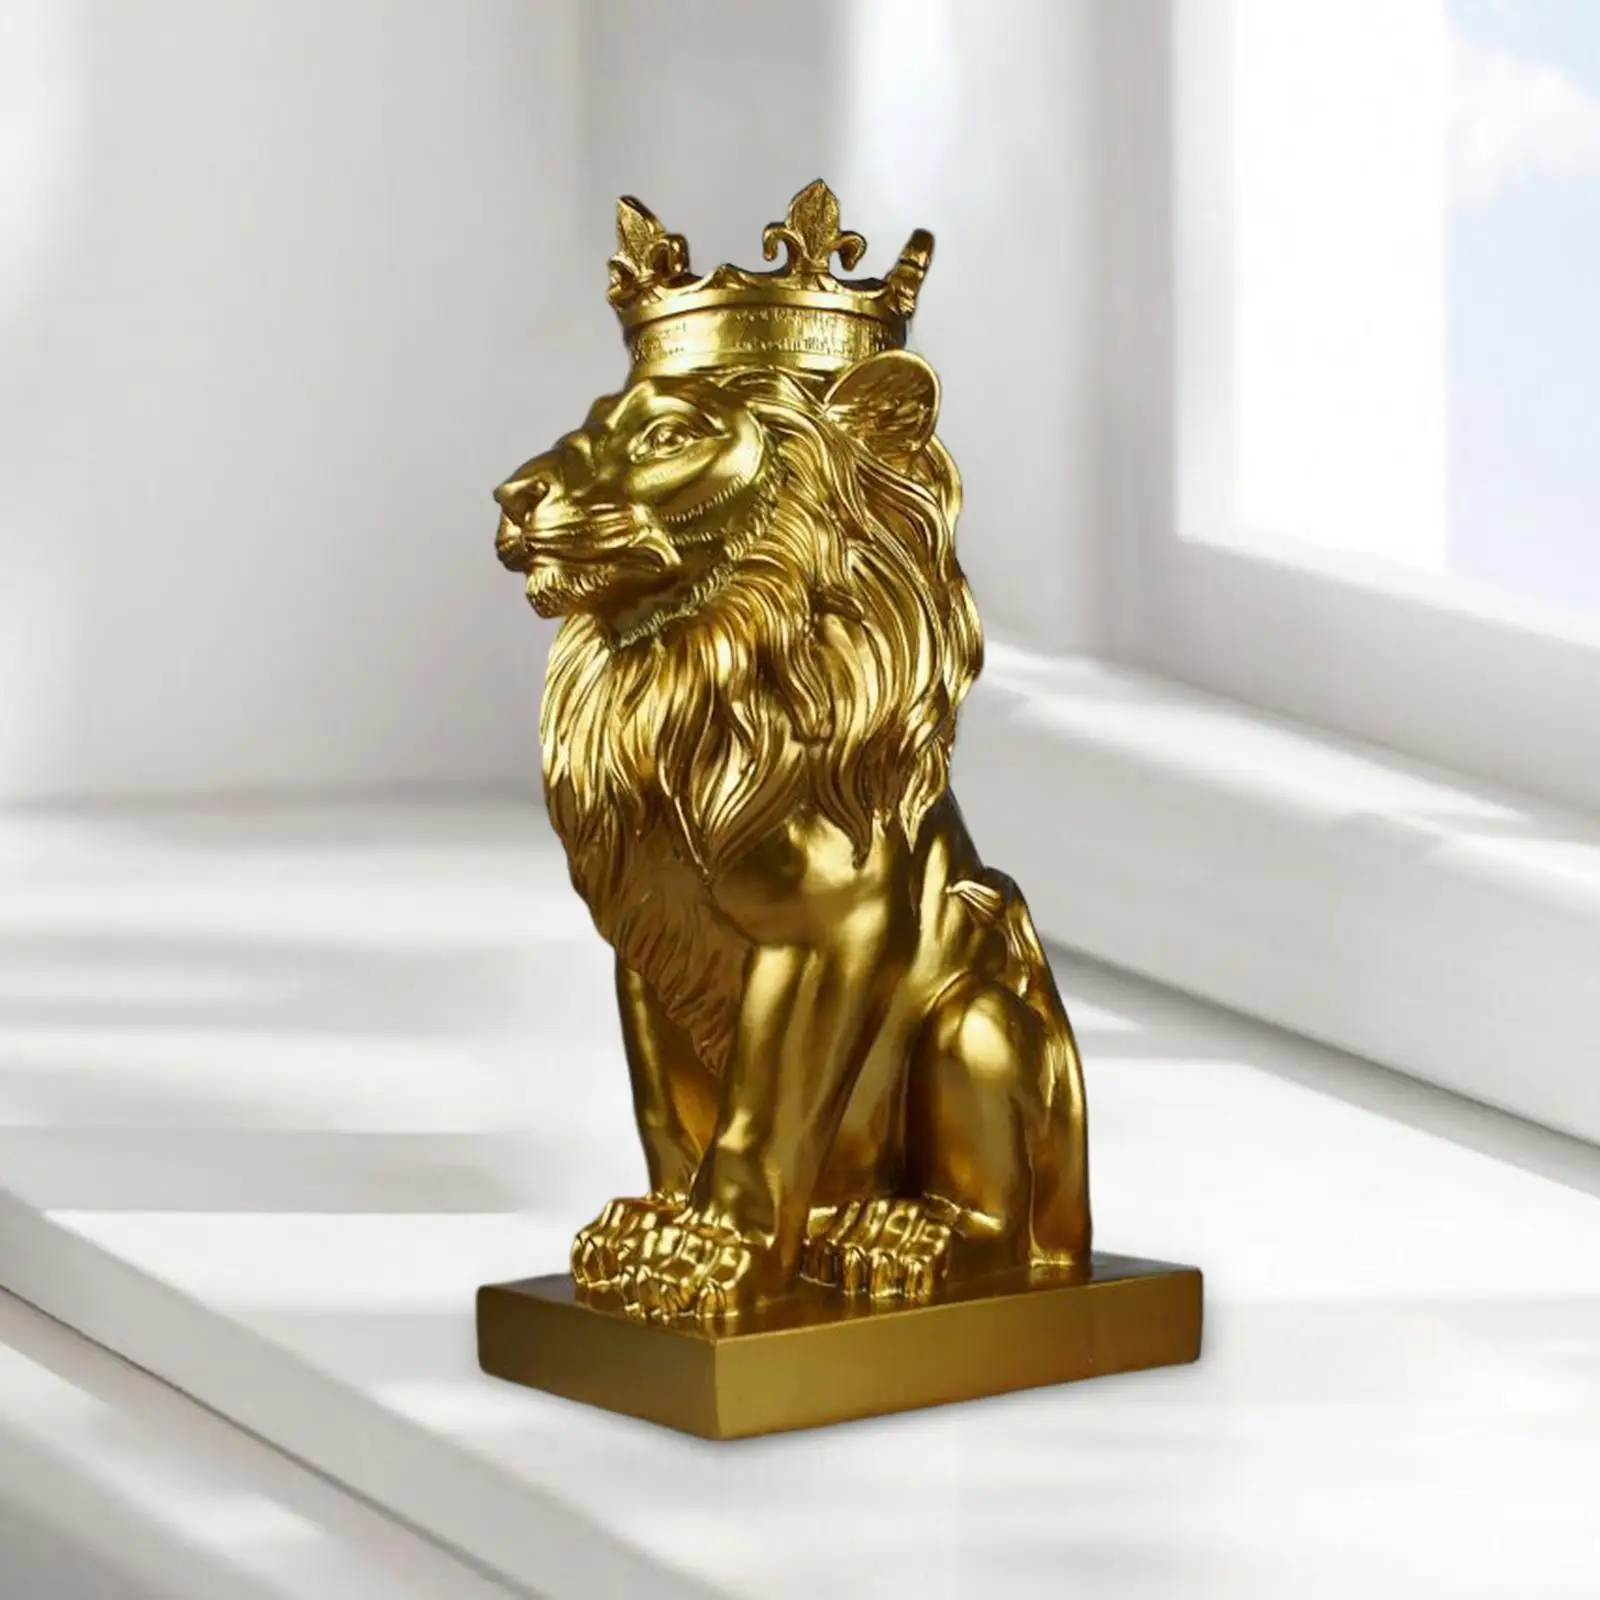 Nordic Style Lion Head Statue Animal Figurine Ornament for Office Tabletop